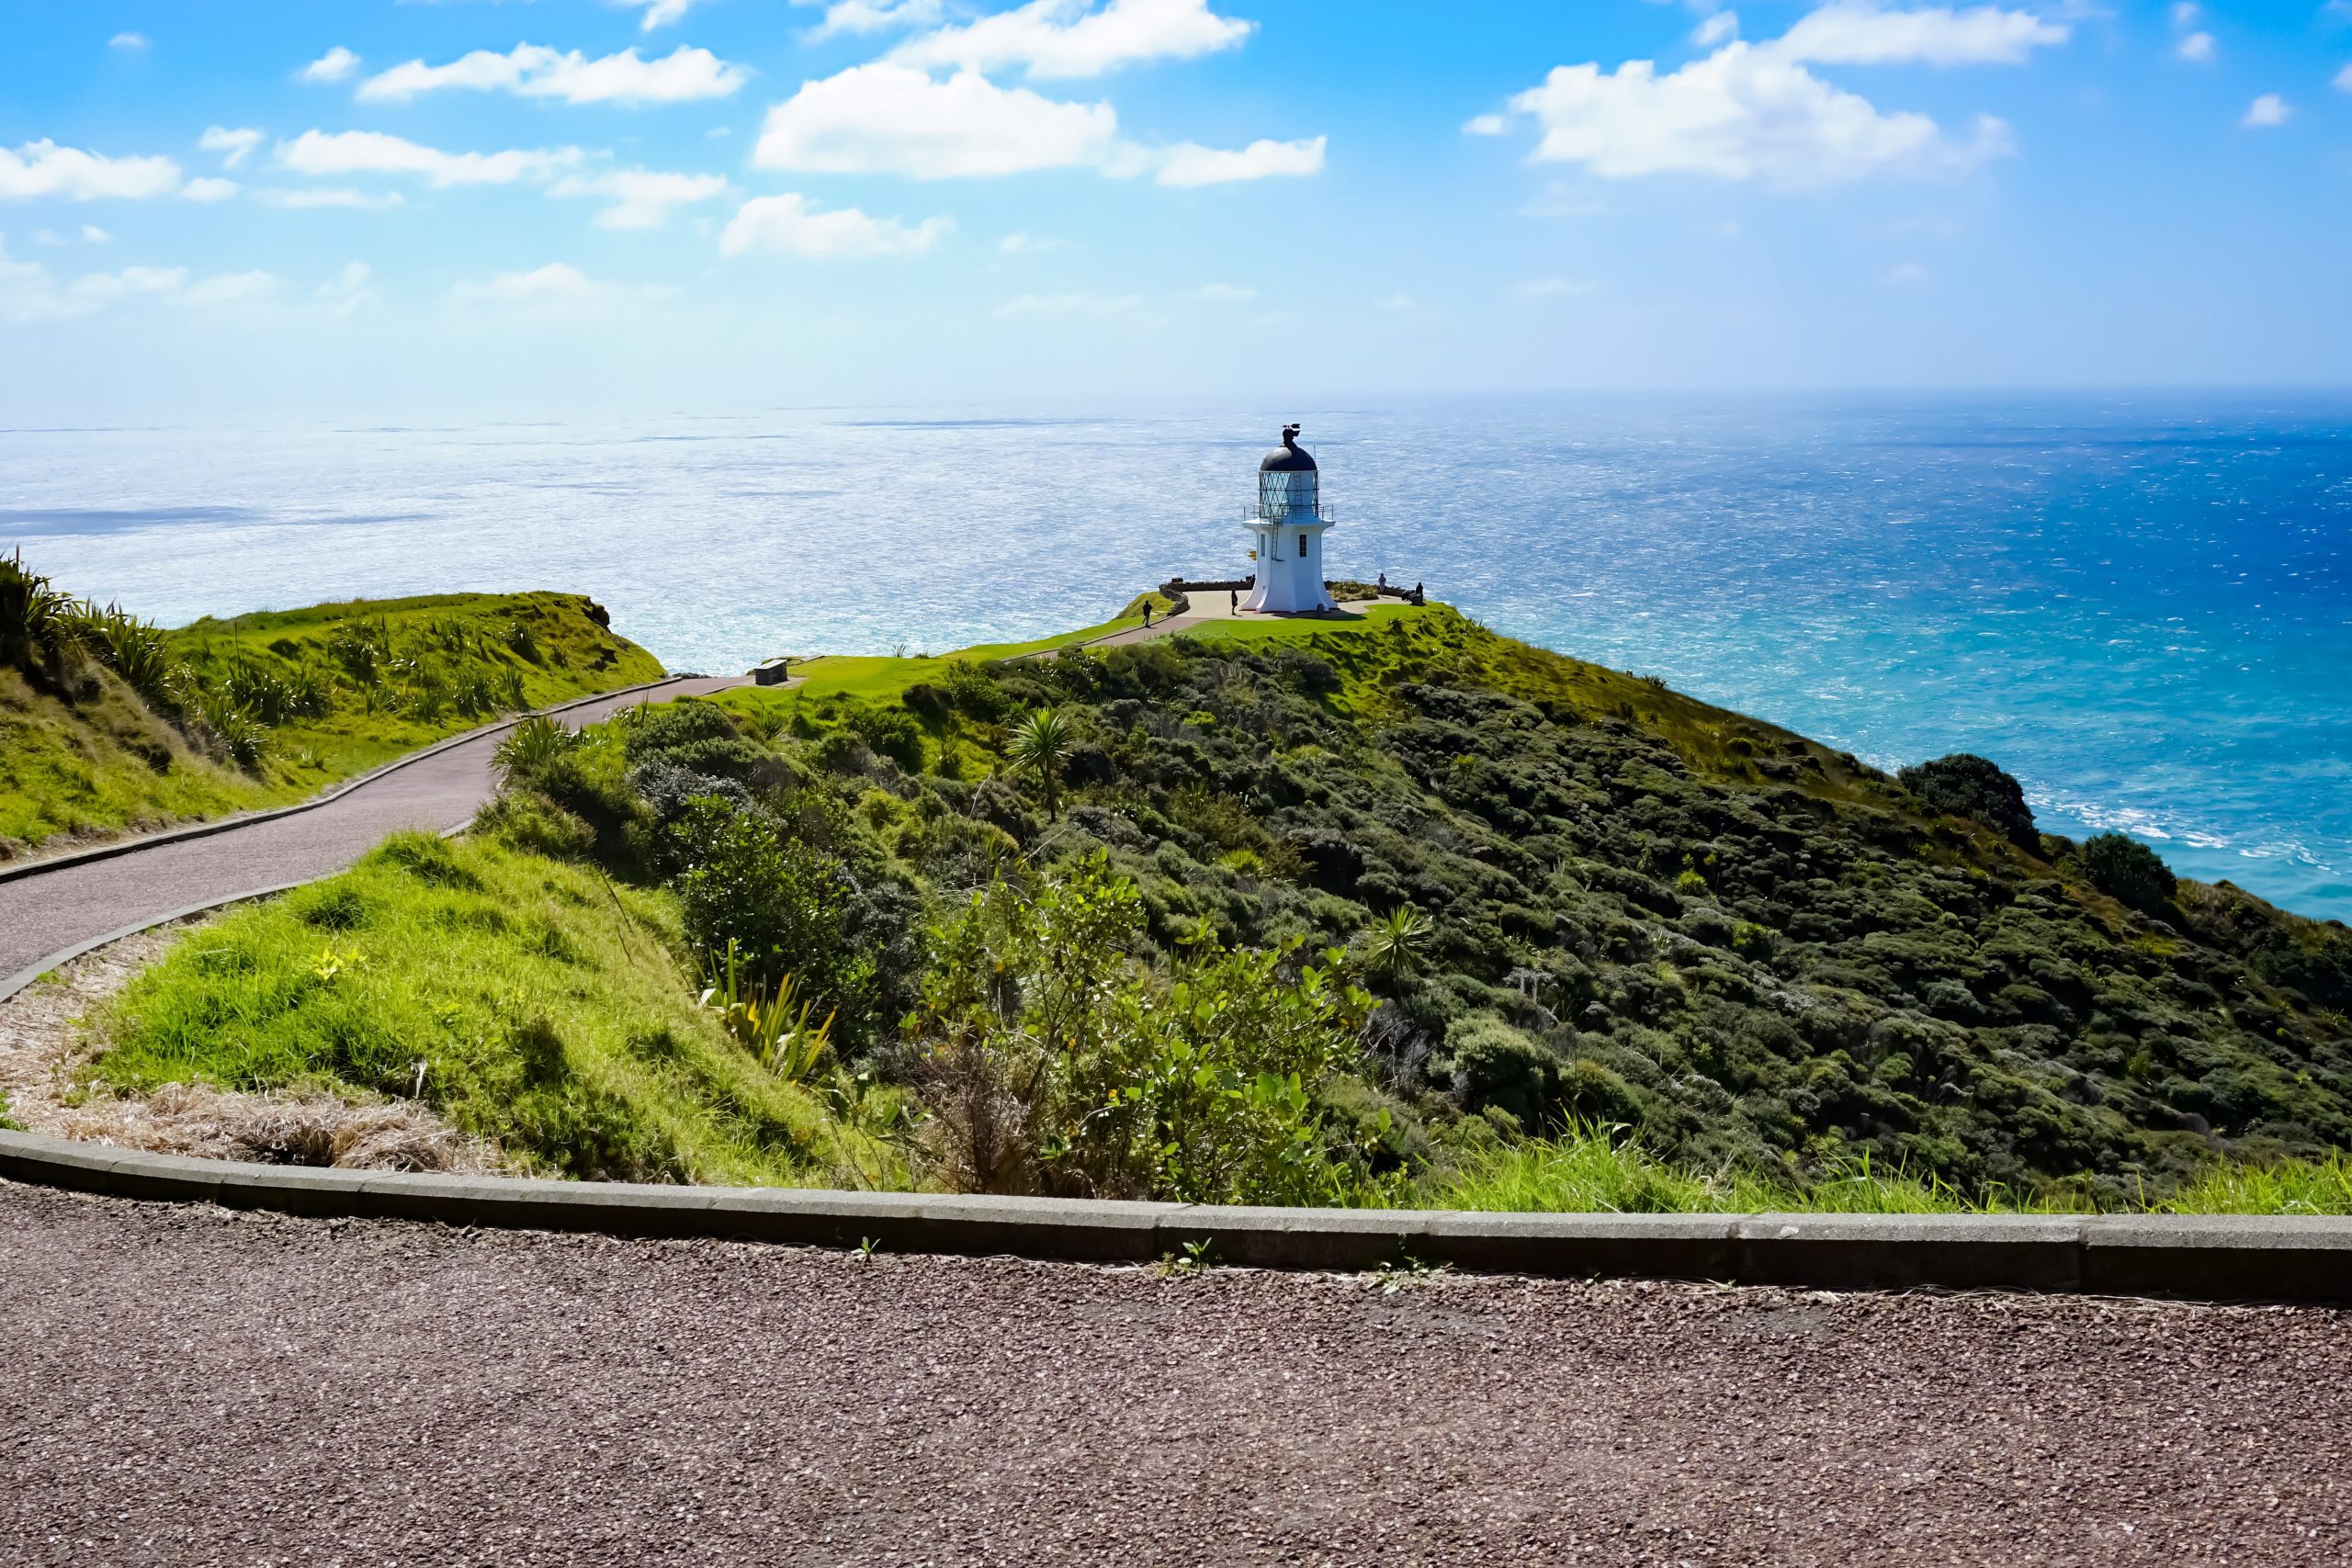 A tarmac path leading down to a small white lighthouse surrounded by grassland and the blue ocean beyond it.